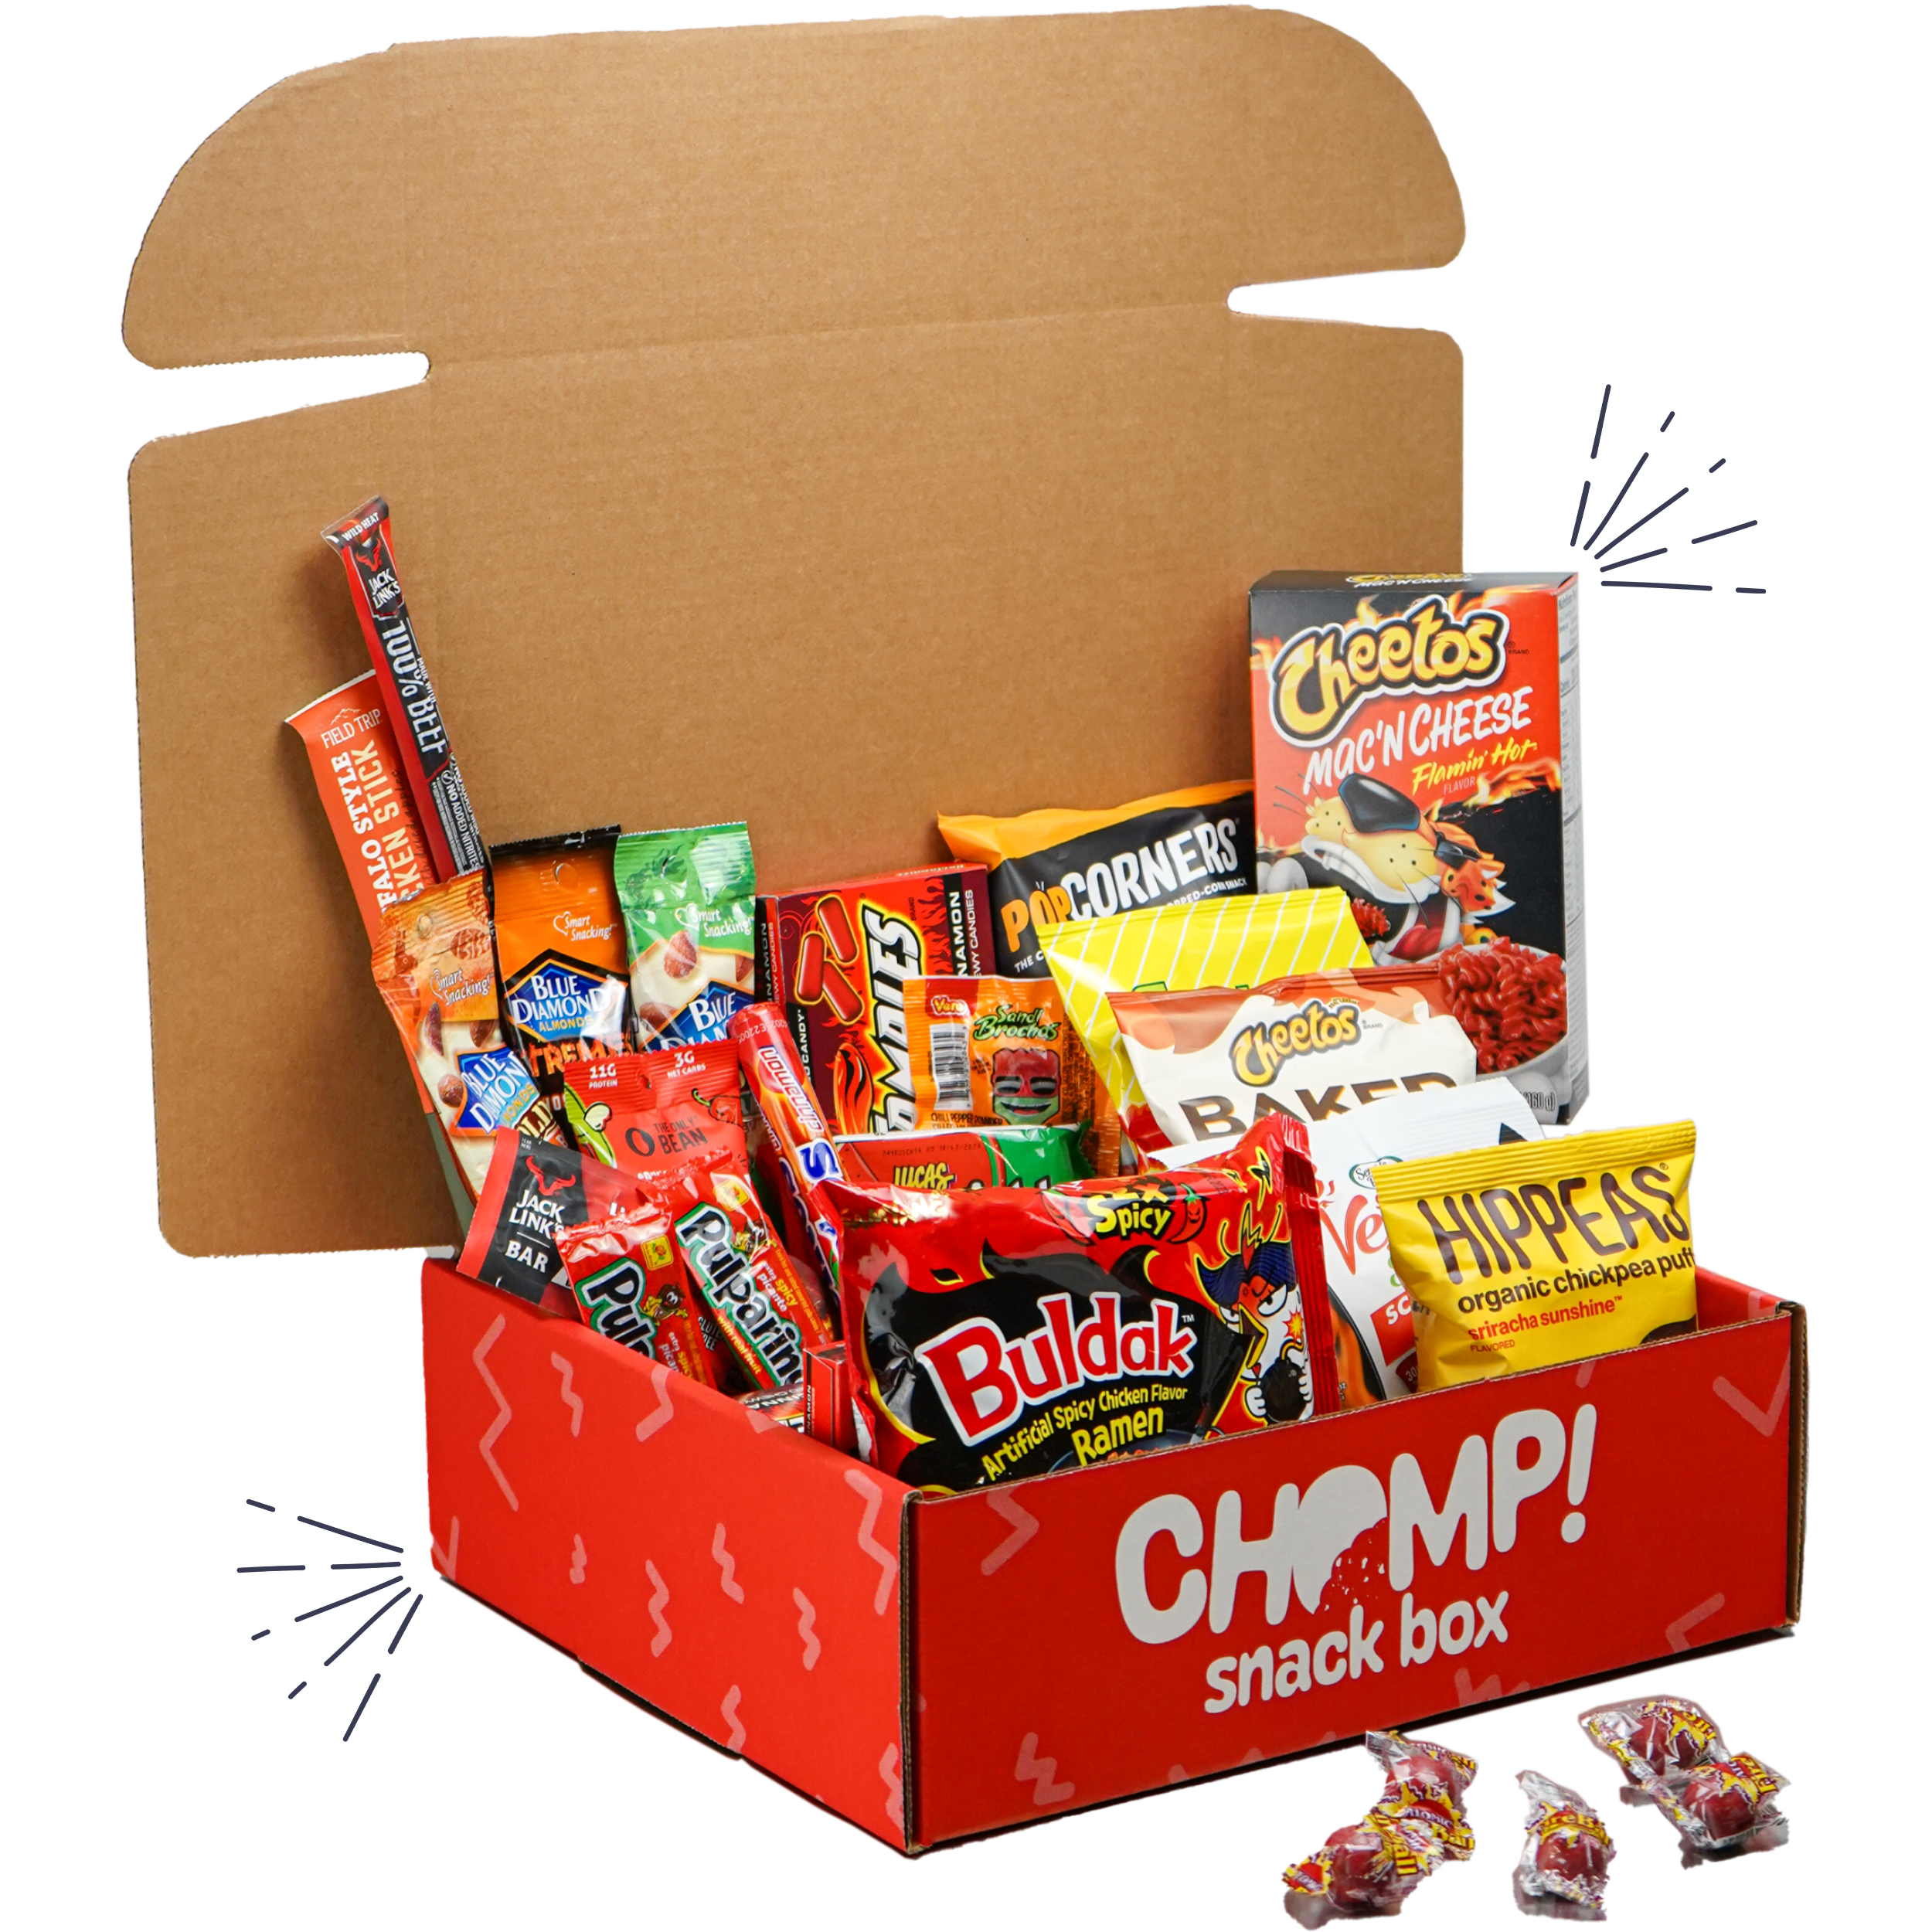 subscription snack box, snack box, assorted snacks, monthly snack box, spicy snack box, spicy subscription snack box, snacking, spicy snacks, spicy snacks box, chomp snack box, elijah's xtreme snack box